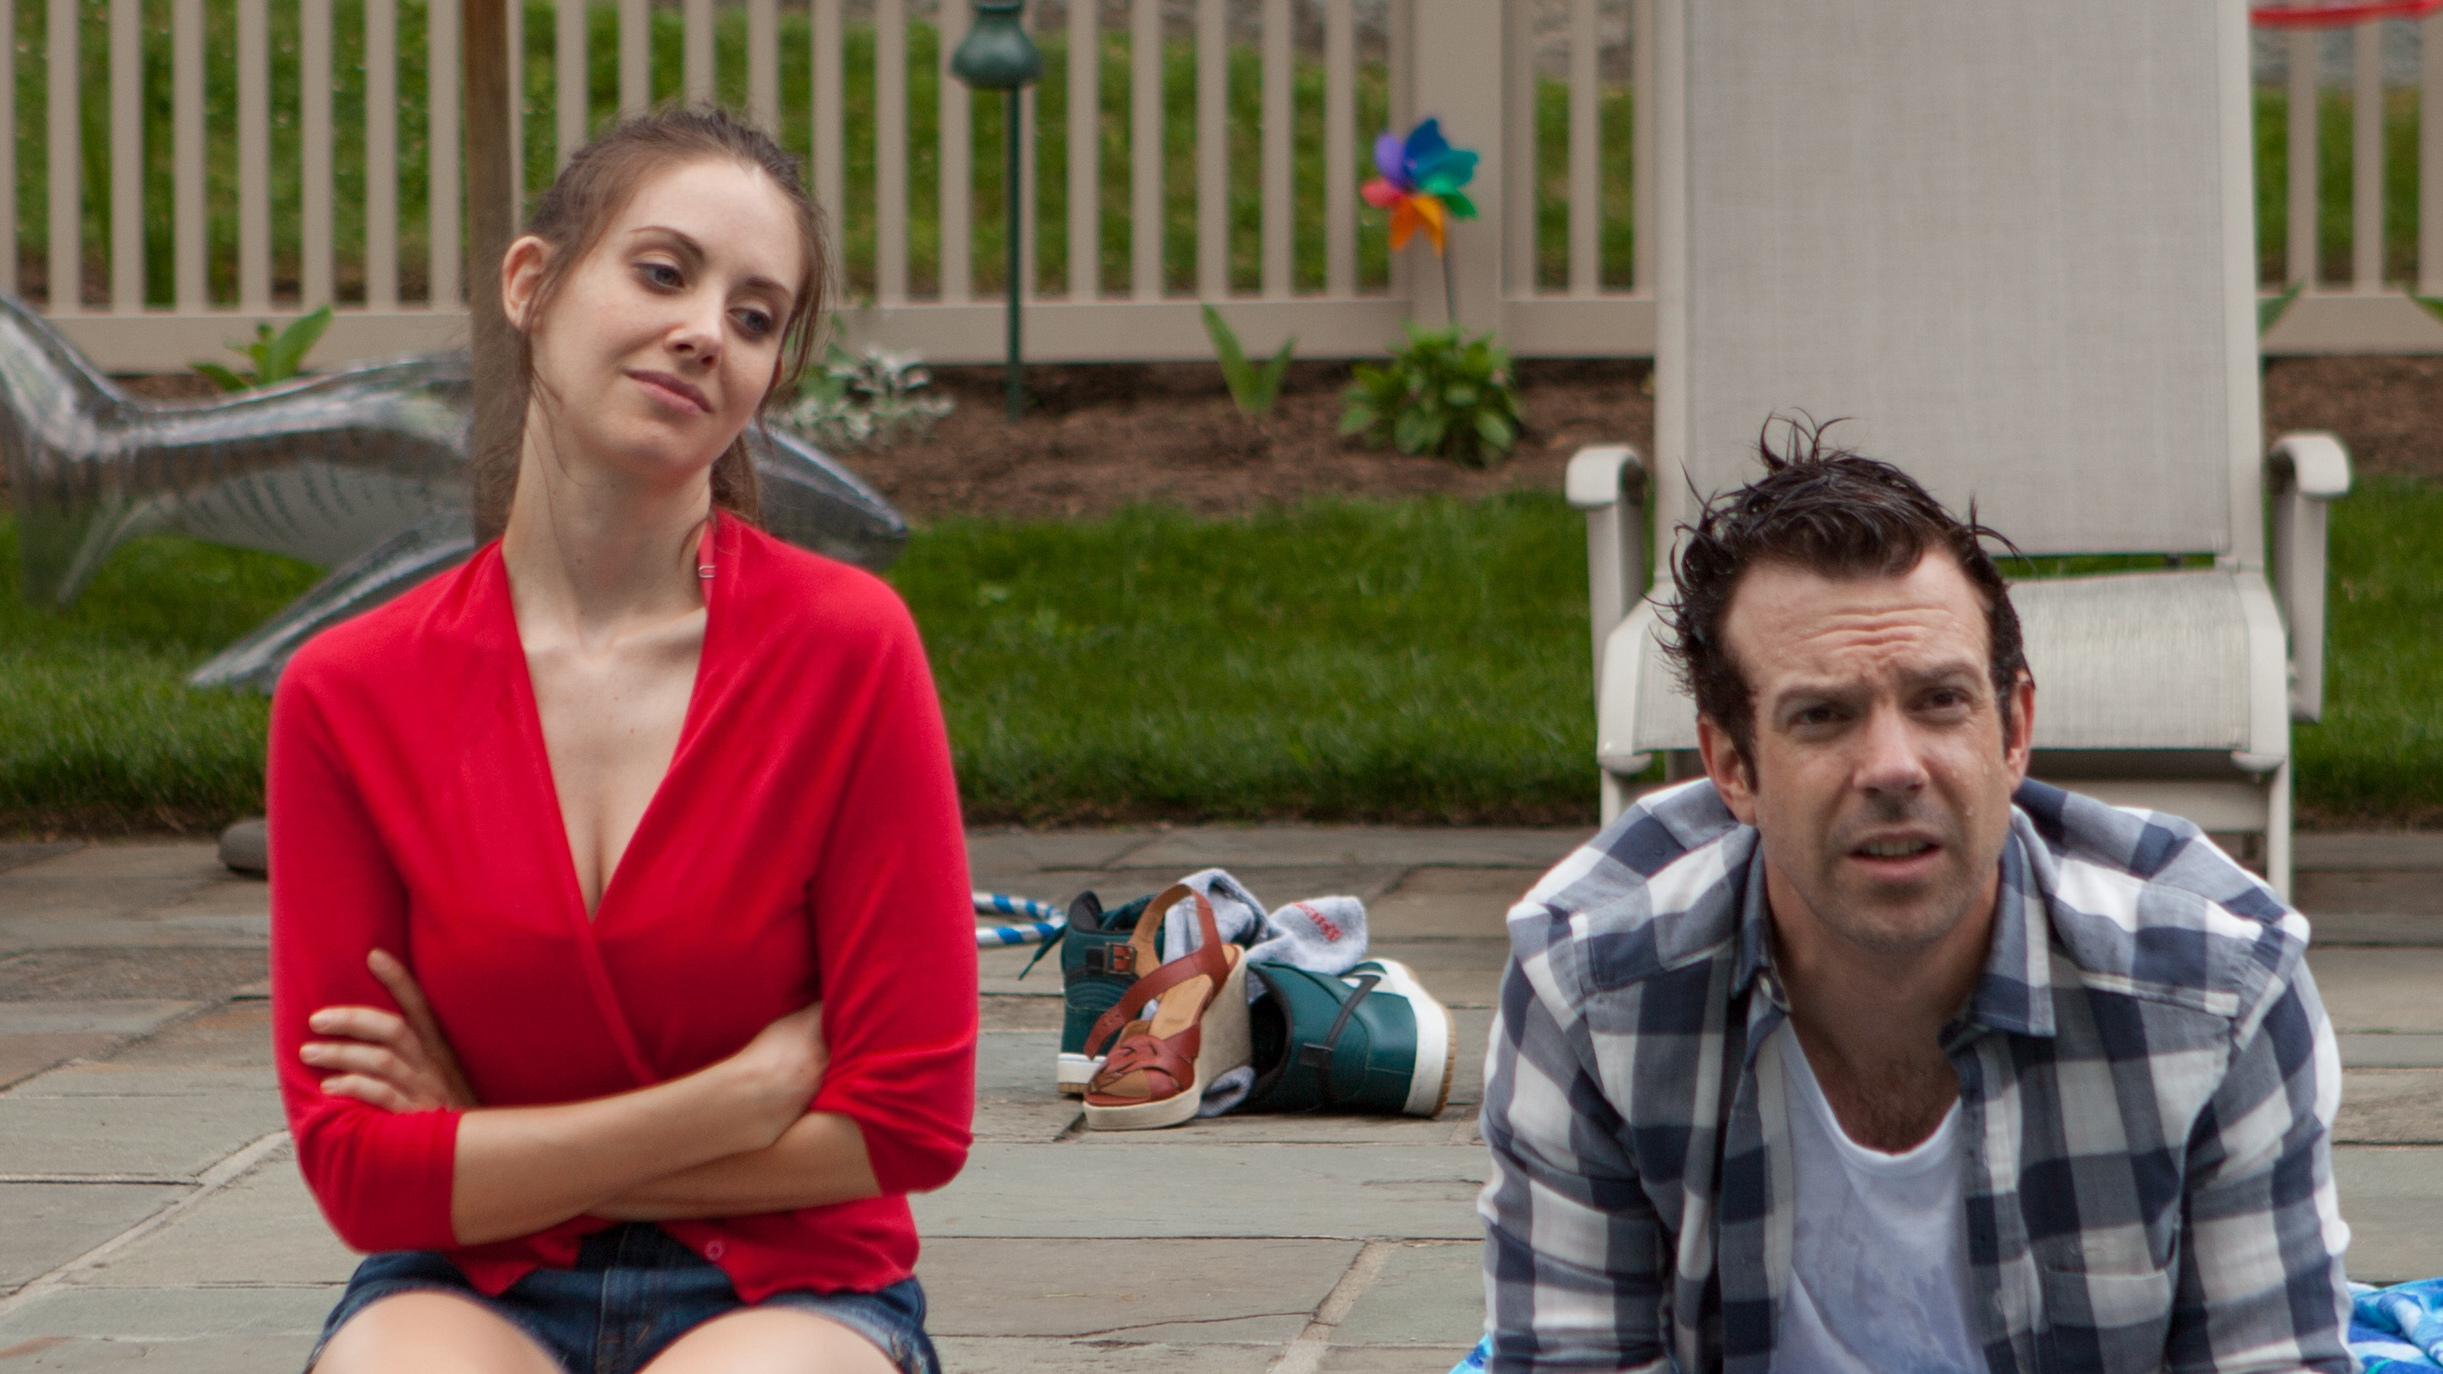 Image is from the film 'Sleeping With Other People' (2015). A man and woman sit next to each other beside a pool. The woman looks at the man, who is wearing a black plaid shirt. She is wearing a red cardigan and shorts.